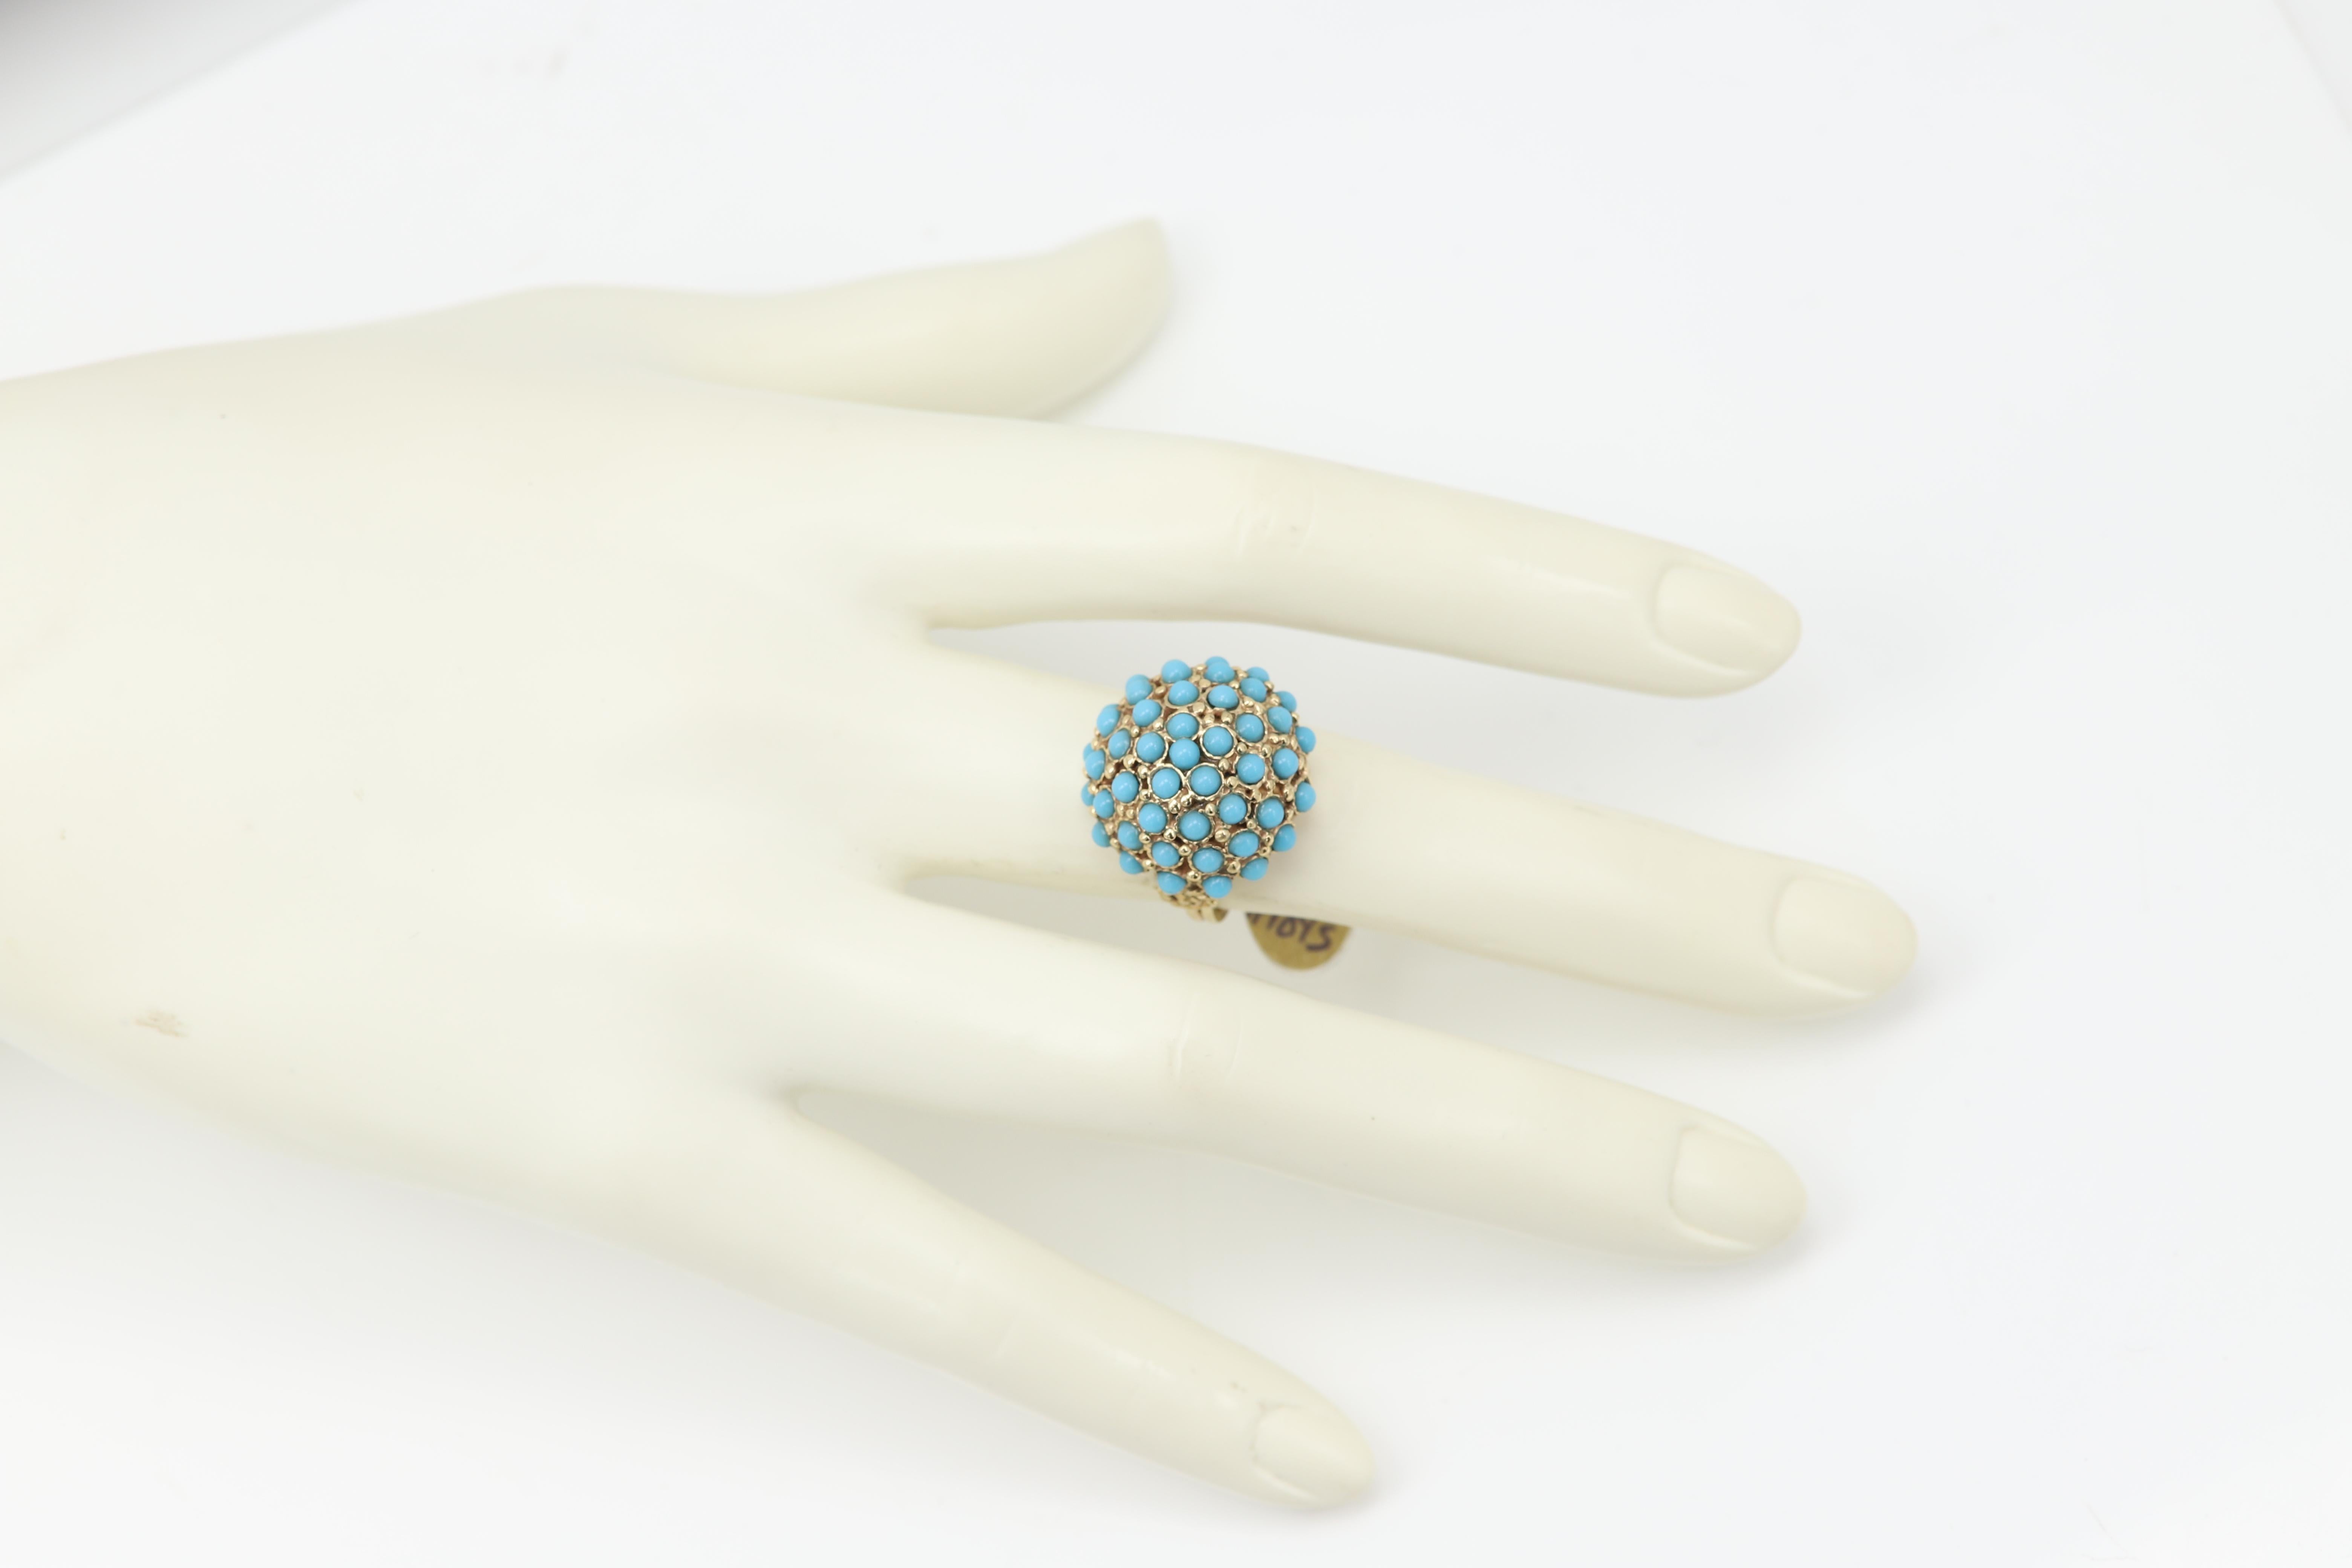 Antique Turquoise Ring 14 Karat Yellow Gold Cluster Design Persian Turquoise For Sale 1